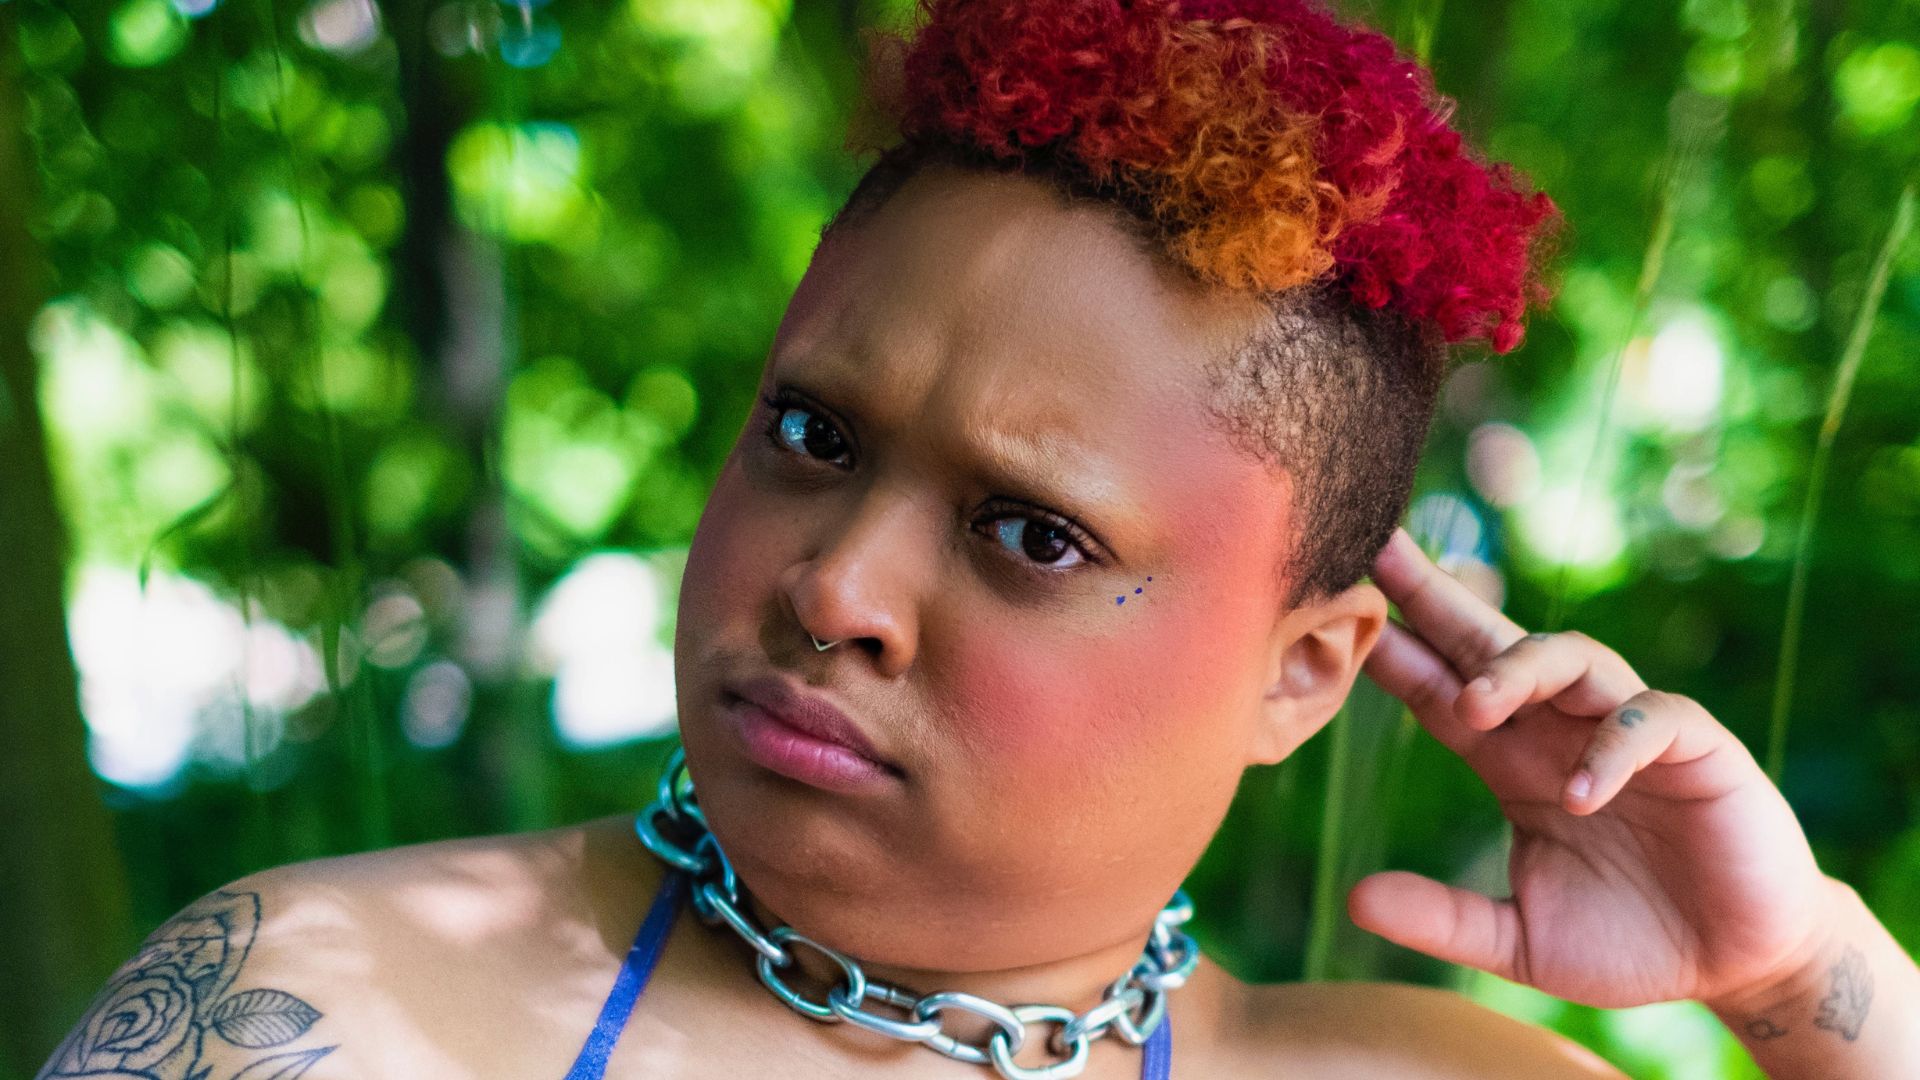 x, a light skinned Afro-Asian agender person sits on a park bench. Their head is tilted to one side, leaning on 2 fingers. Their afro hair is short cropped with red, orange and dark pink. Fae has several tattoos, most notably “crybaby” text with barbed wire on faer stomach. They don a purple halter top and a chunky silver chain around their neck. The trees and foliage of the park are saturated and blurred behind them. They are making a slightly confused, slightly disappointed facial expression that could come across as humorous.